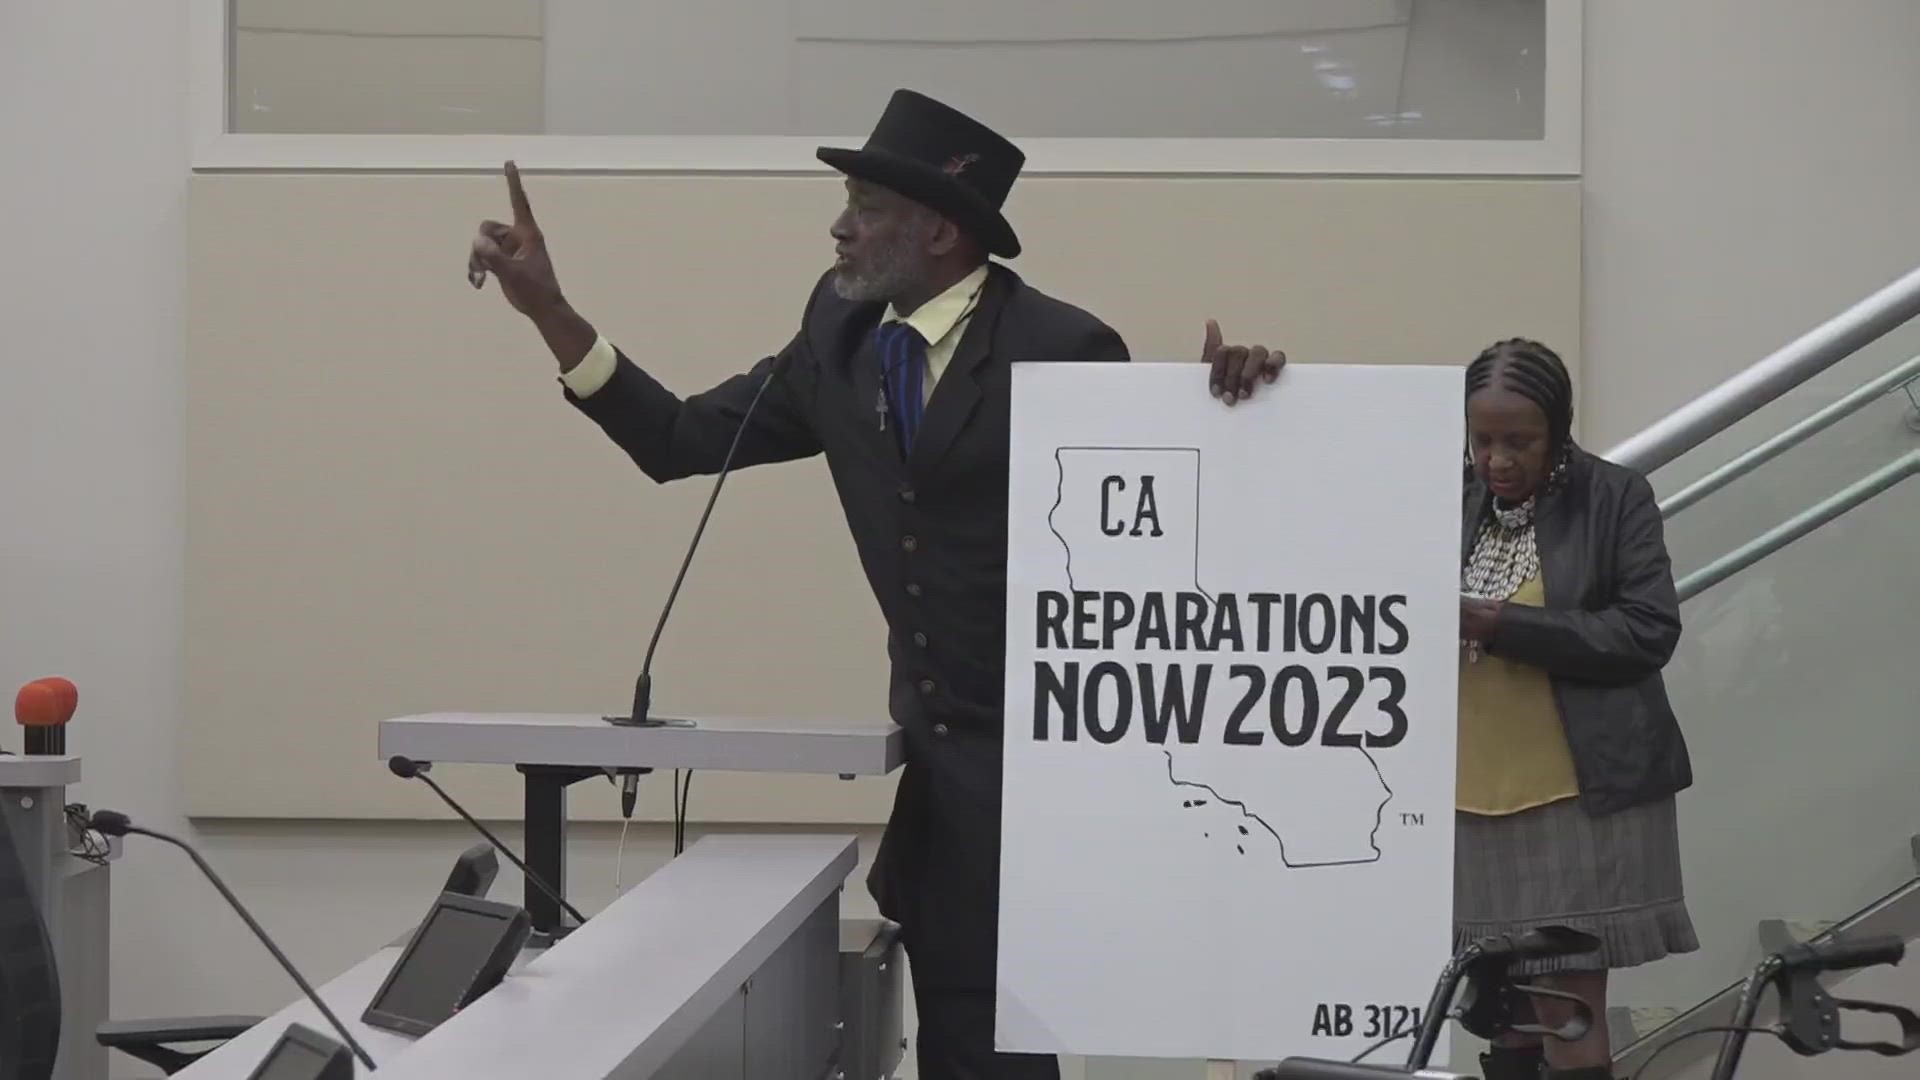 The California Reparations Task force is coming up with recommendations for how reparations should look for Black Californians.